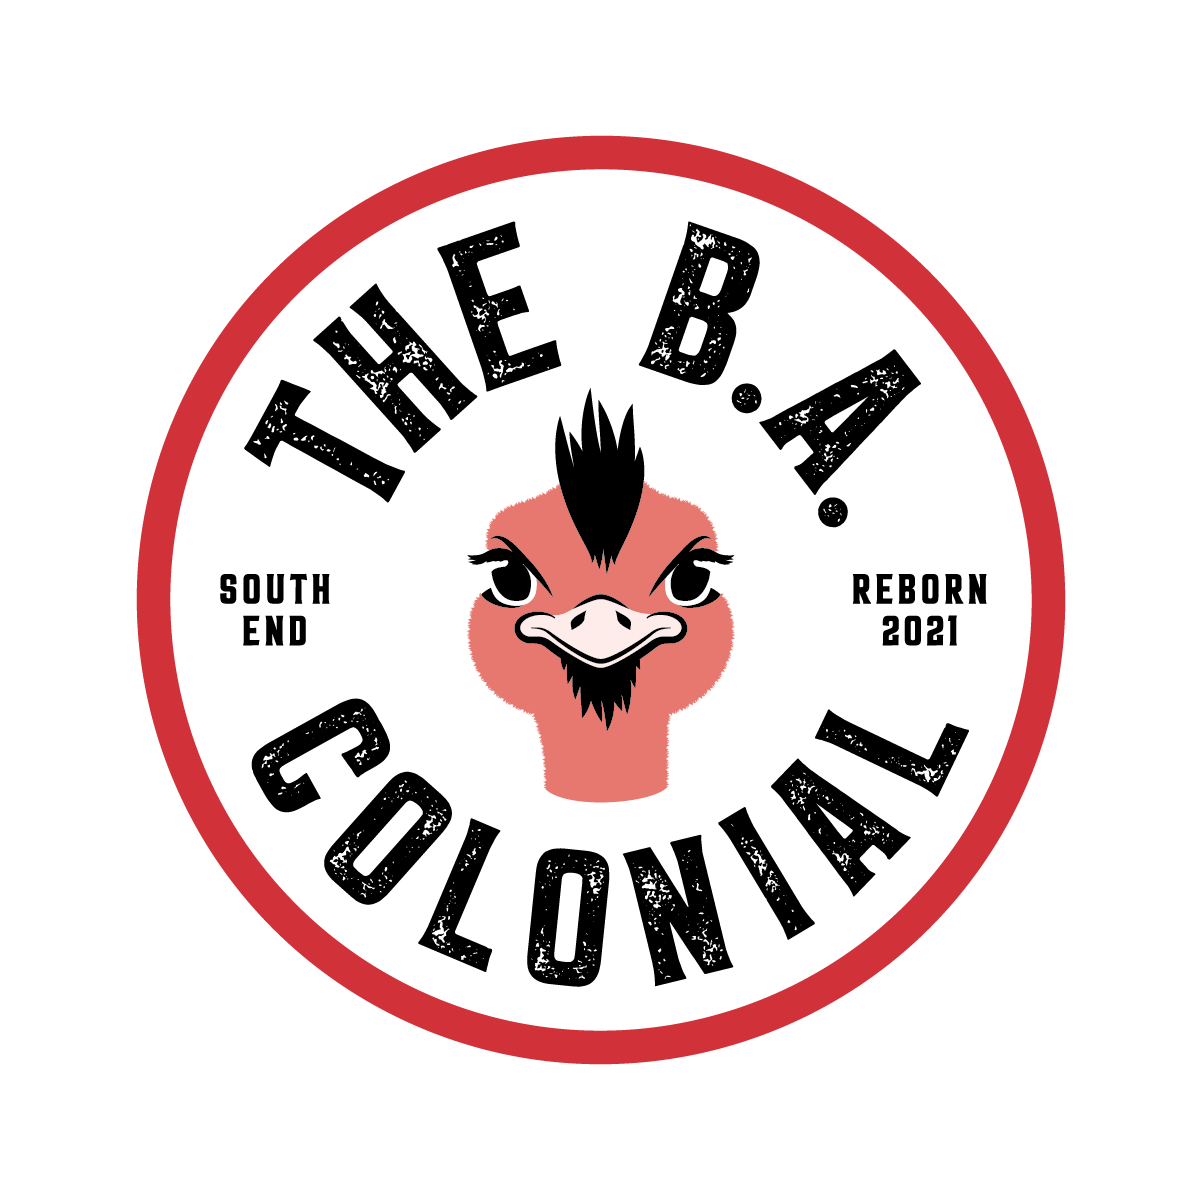 The B.A. Colonial